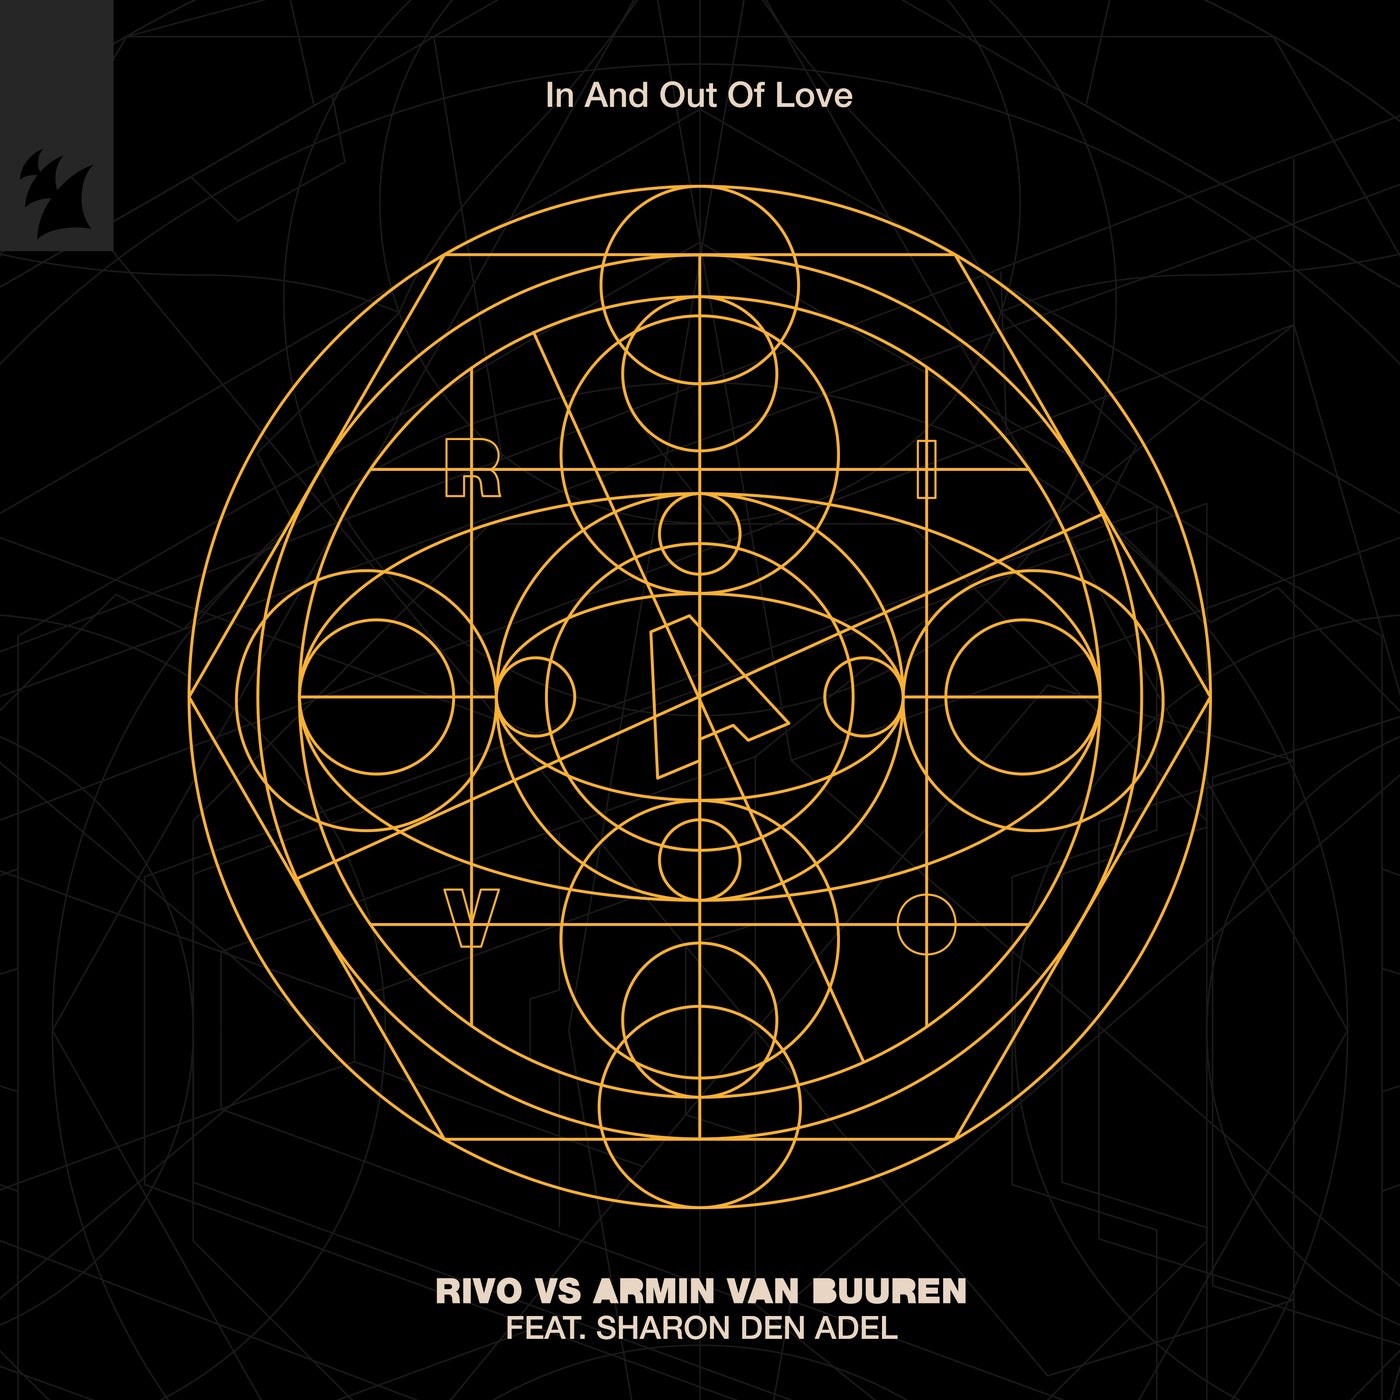 image cover: Armin van Buuren, Rivo, Sharon Den Adel - In And Out Of Love on Armada Music